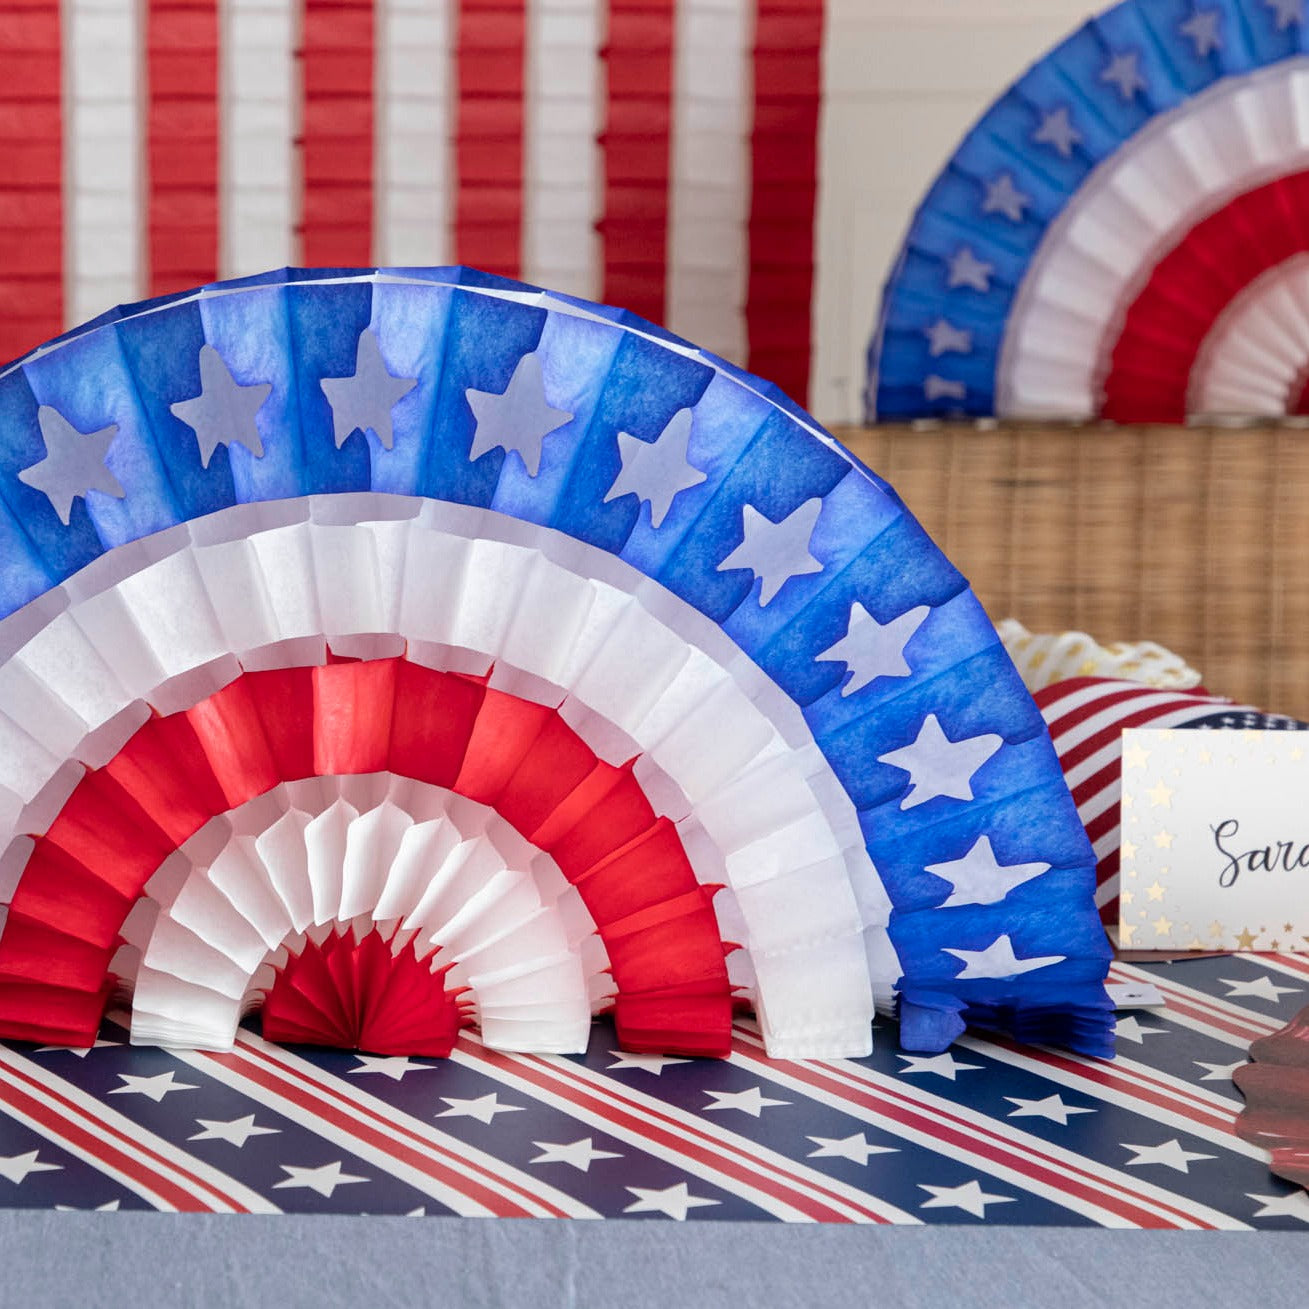 The Stars and Stripes Runner under a patriotic tablescape.